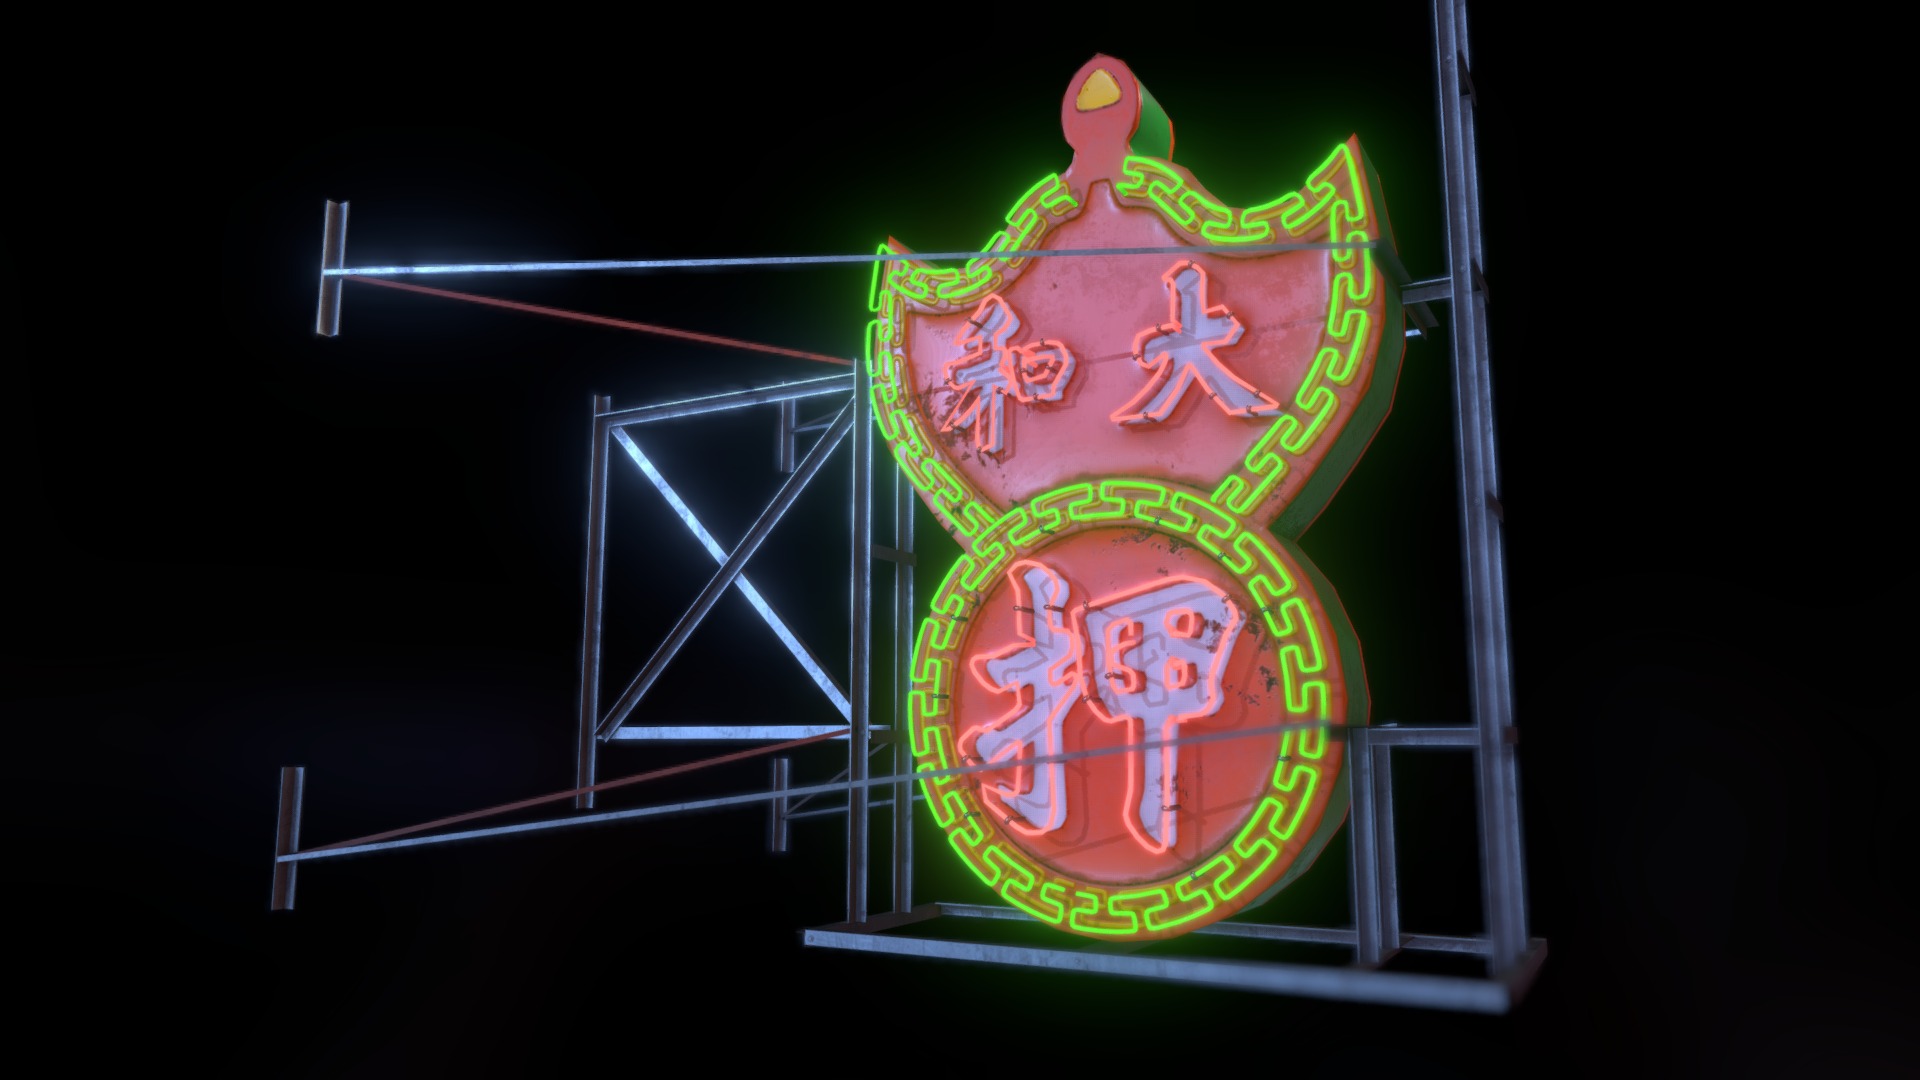 3D model Hong Kong Pawn shop neon sign - This is a 3D model of the Hong Kong Pawn shop neon sign. The 3D model is about diagram.